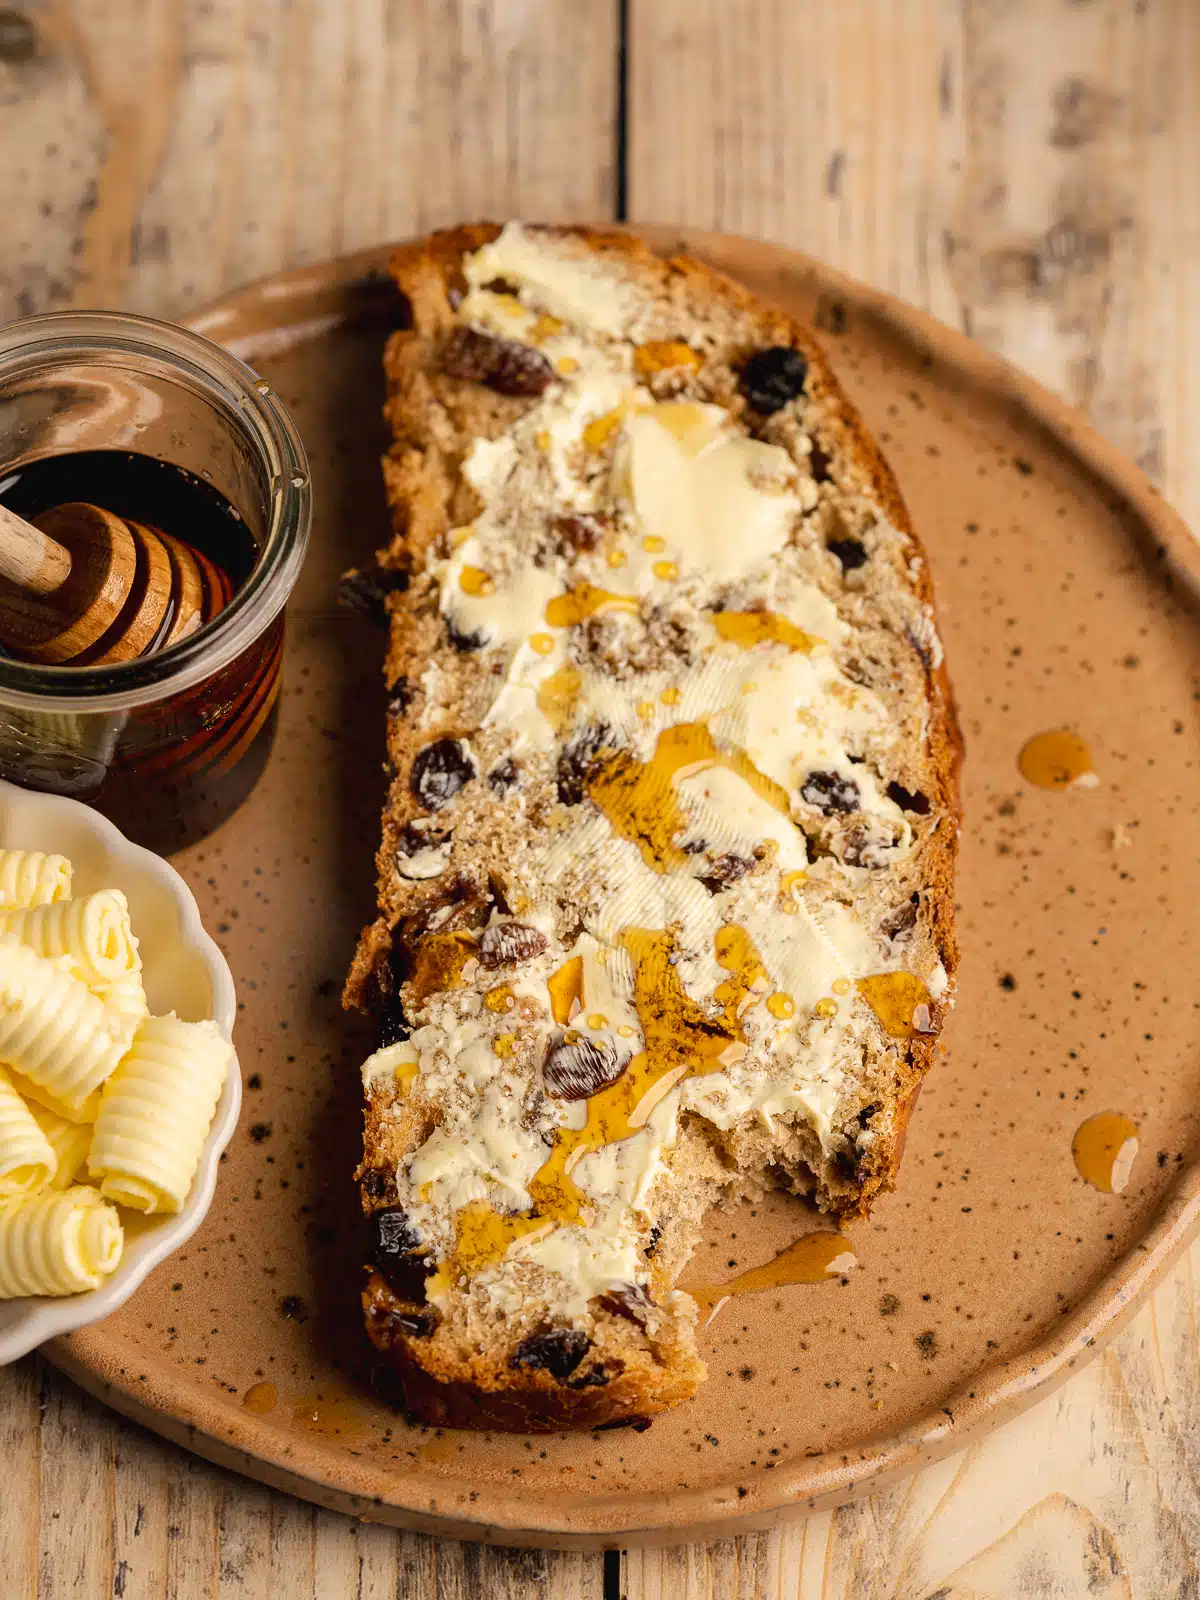 a slice of buttered barmbrack on an earthenware plate with a drizzle of maple syrup on top and a bite taken out of it.